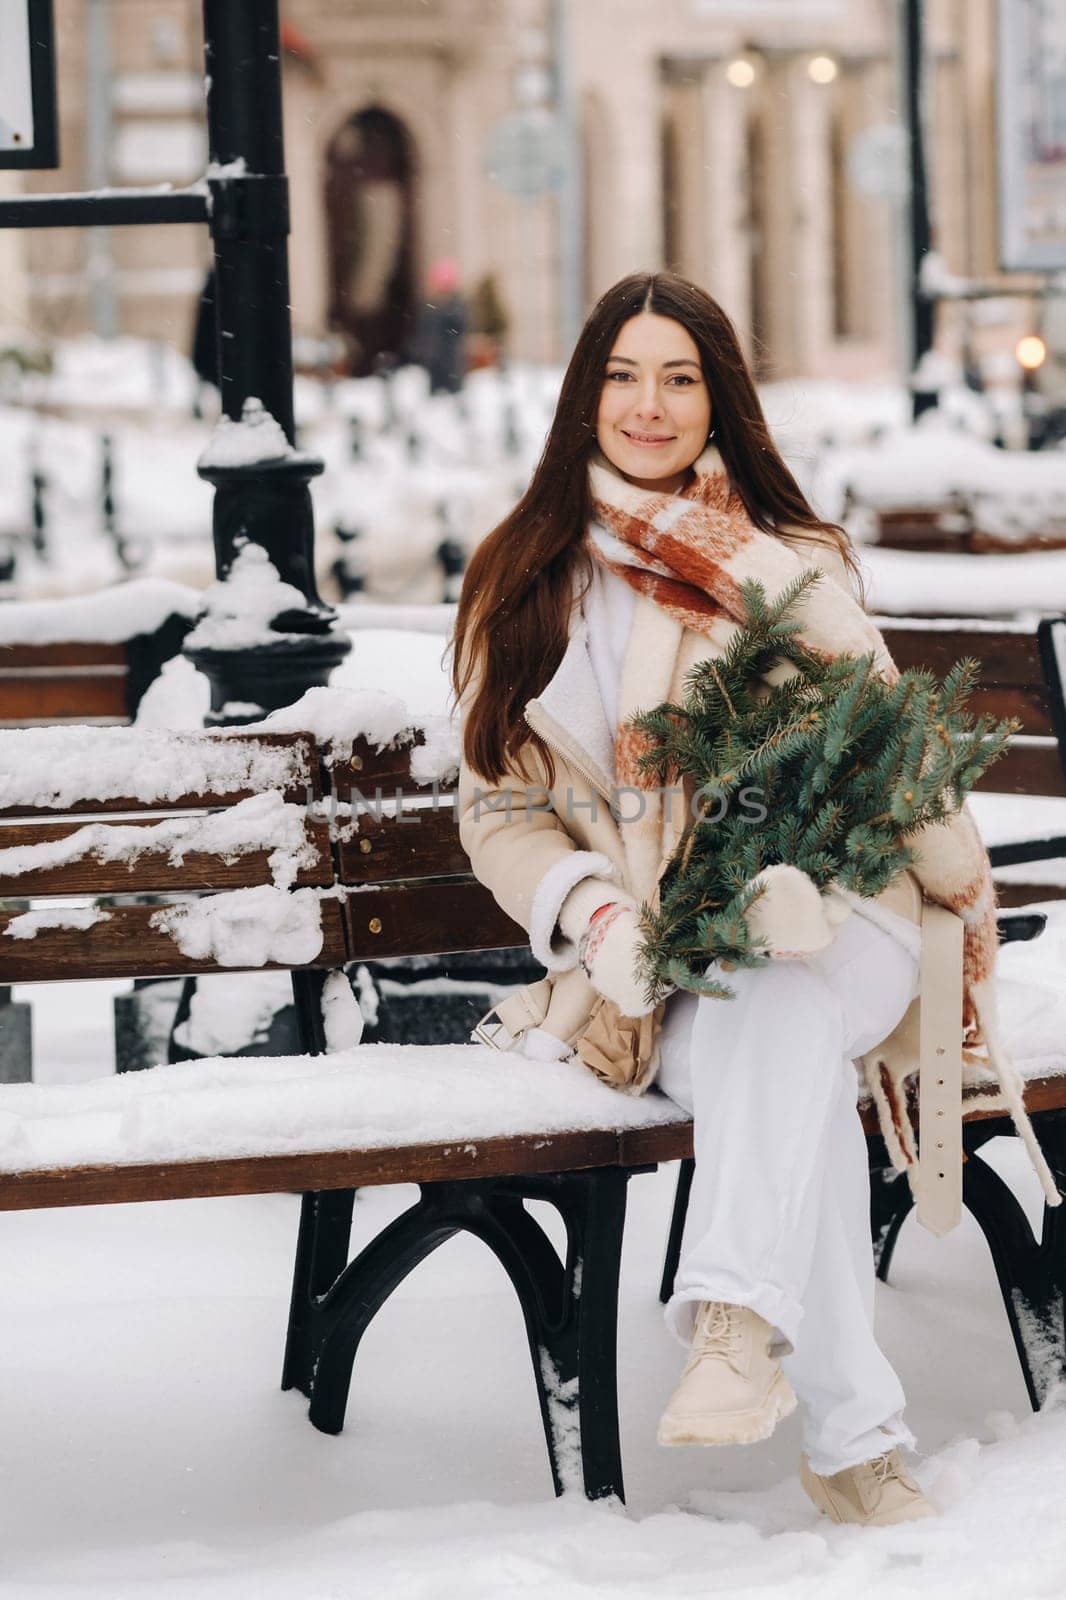 A girl with long hair in winter sits on a bench outside with a bouquet of fresh fir branches.